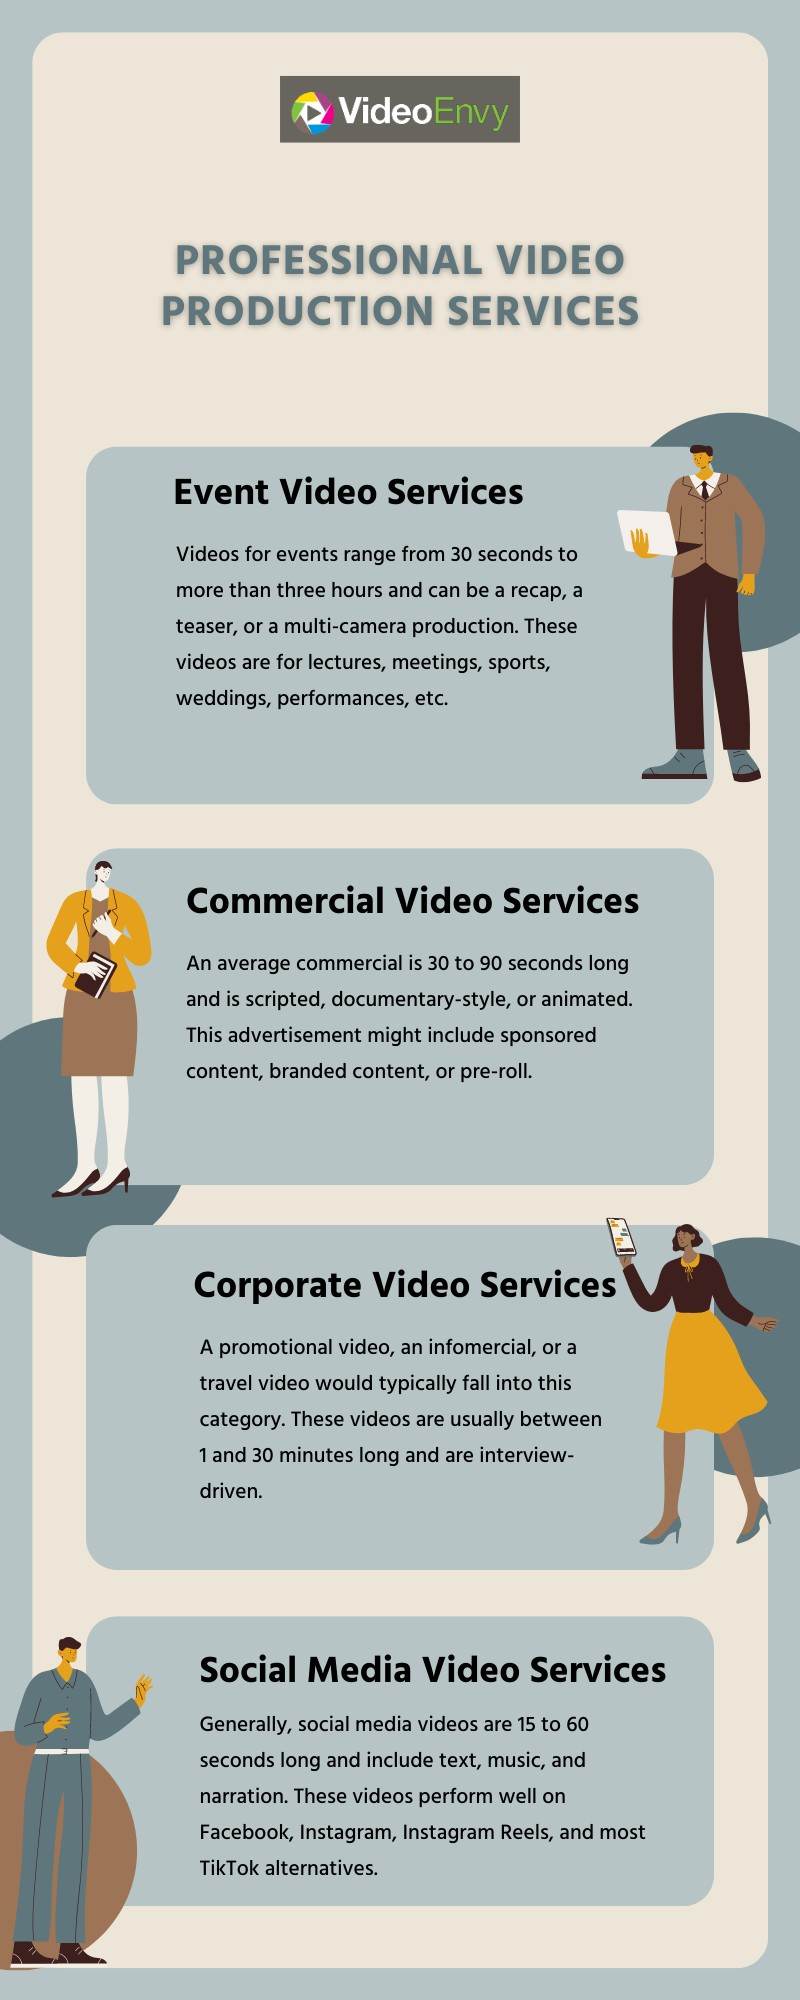 Professional Video Production Services Houston 